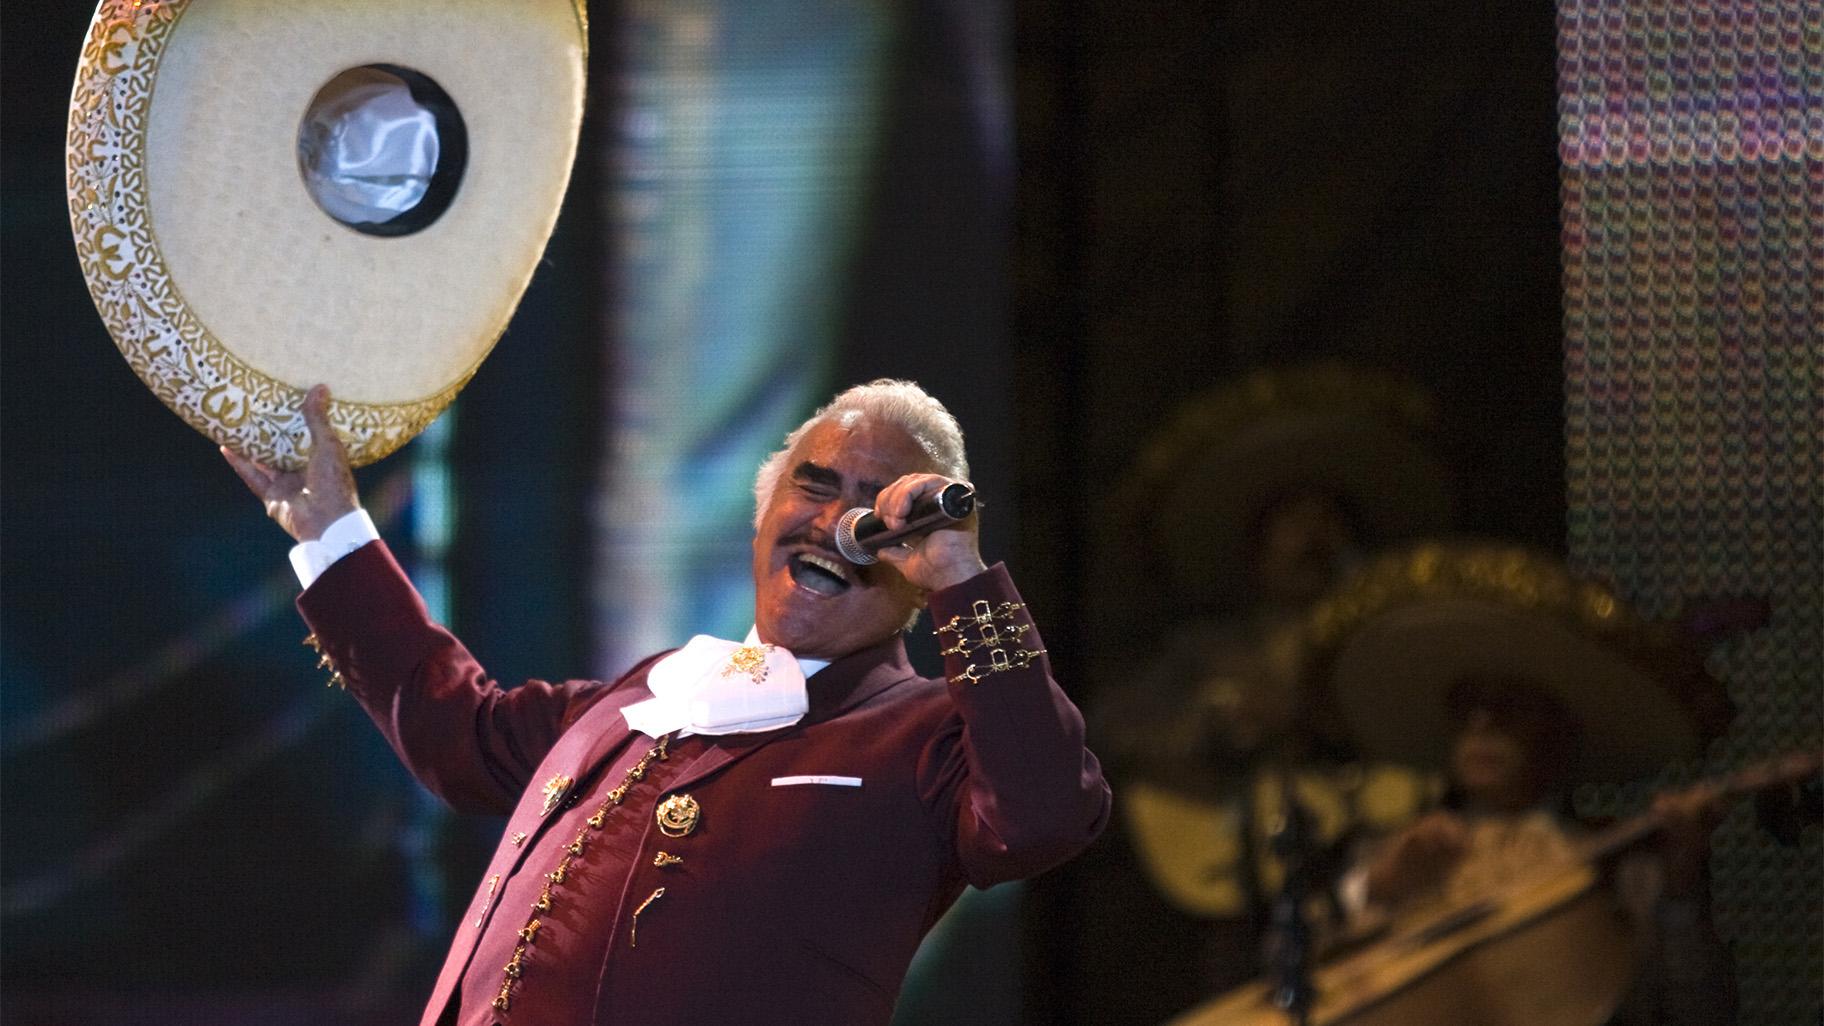 Vicente Fernandez performs at a free concert during Valentine's Day in Mexico City's on Feb. 14, 2009, file photo, singer. On Tuesday, Oct. 8, 2016. The Mexican singer died Sunday at 81 years of age in Guadalajara, Mexico, his family announced in a statement. (AP Photo / Claudio Cruz, File)